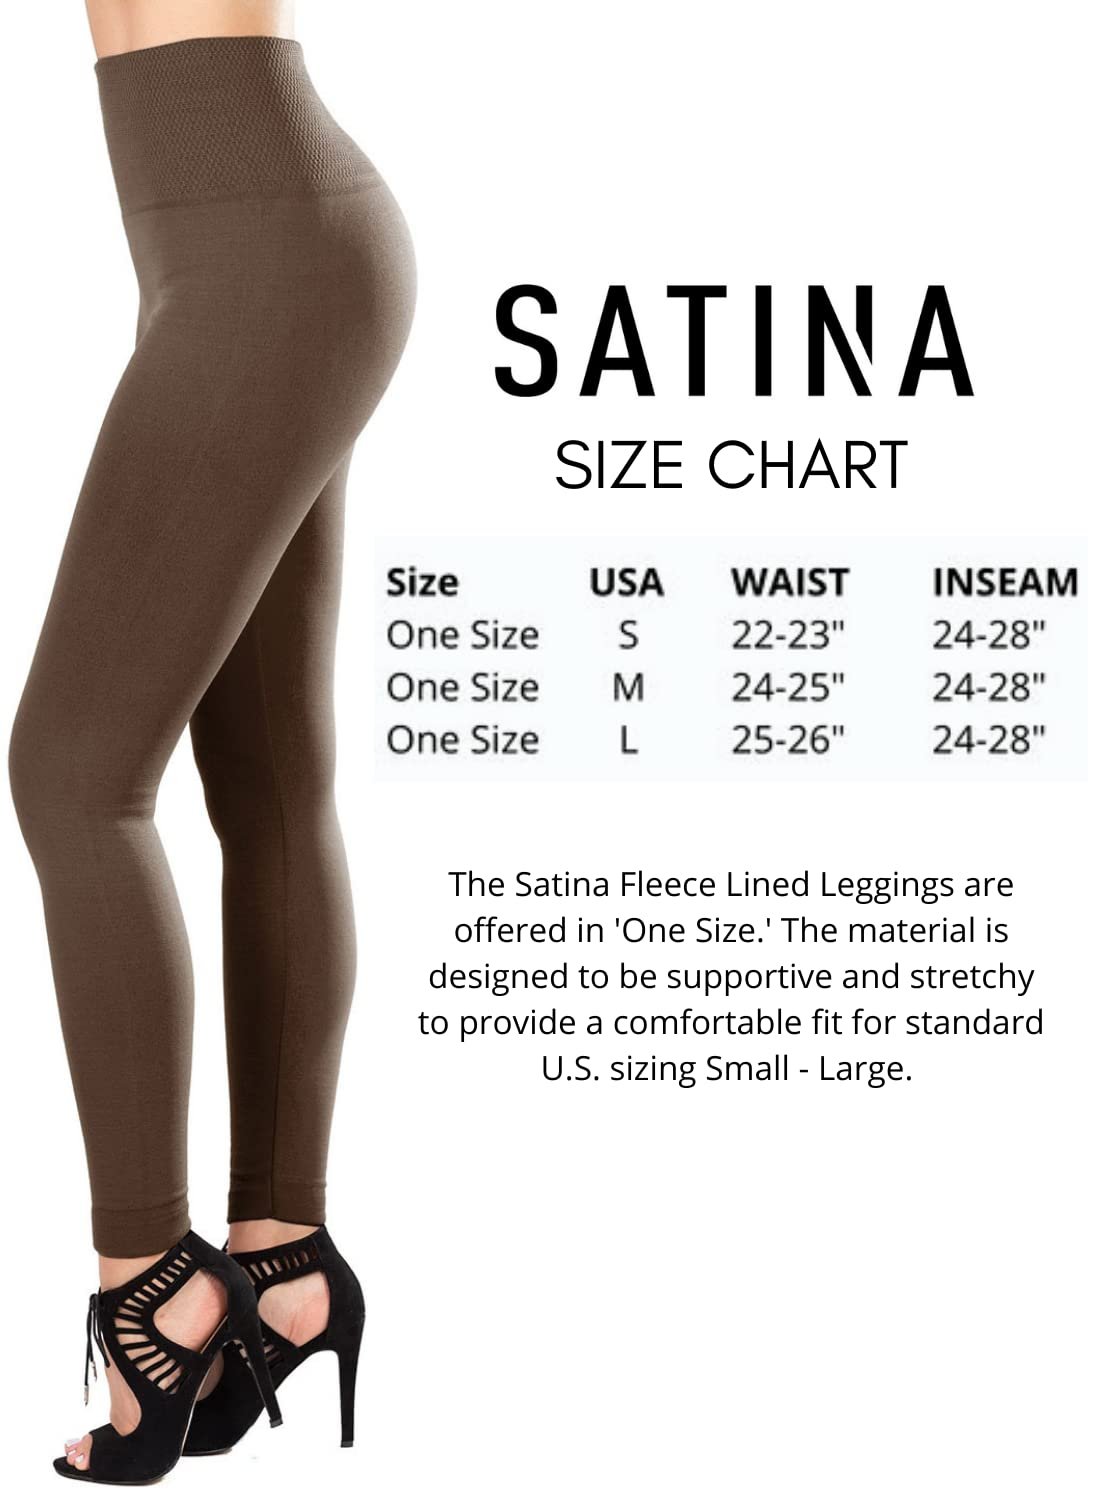 SATINA High Waisted Leggings with Pockets for Women - Workout Leggings for  Regular & Plus Size Women - Black Leggings Women - Yoga Leggings for Women